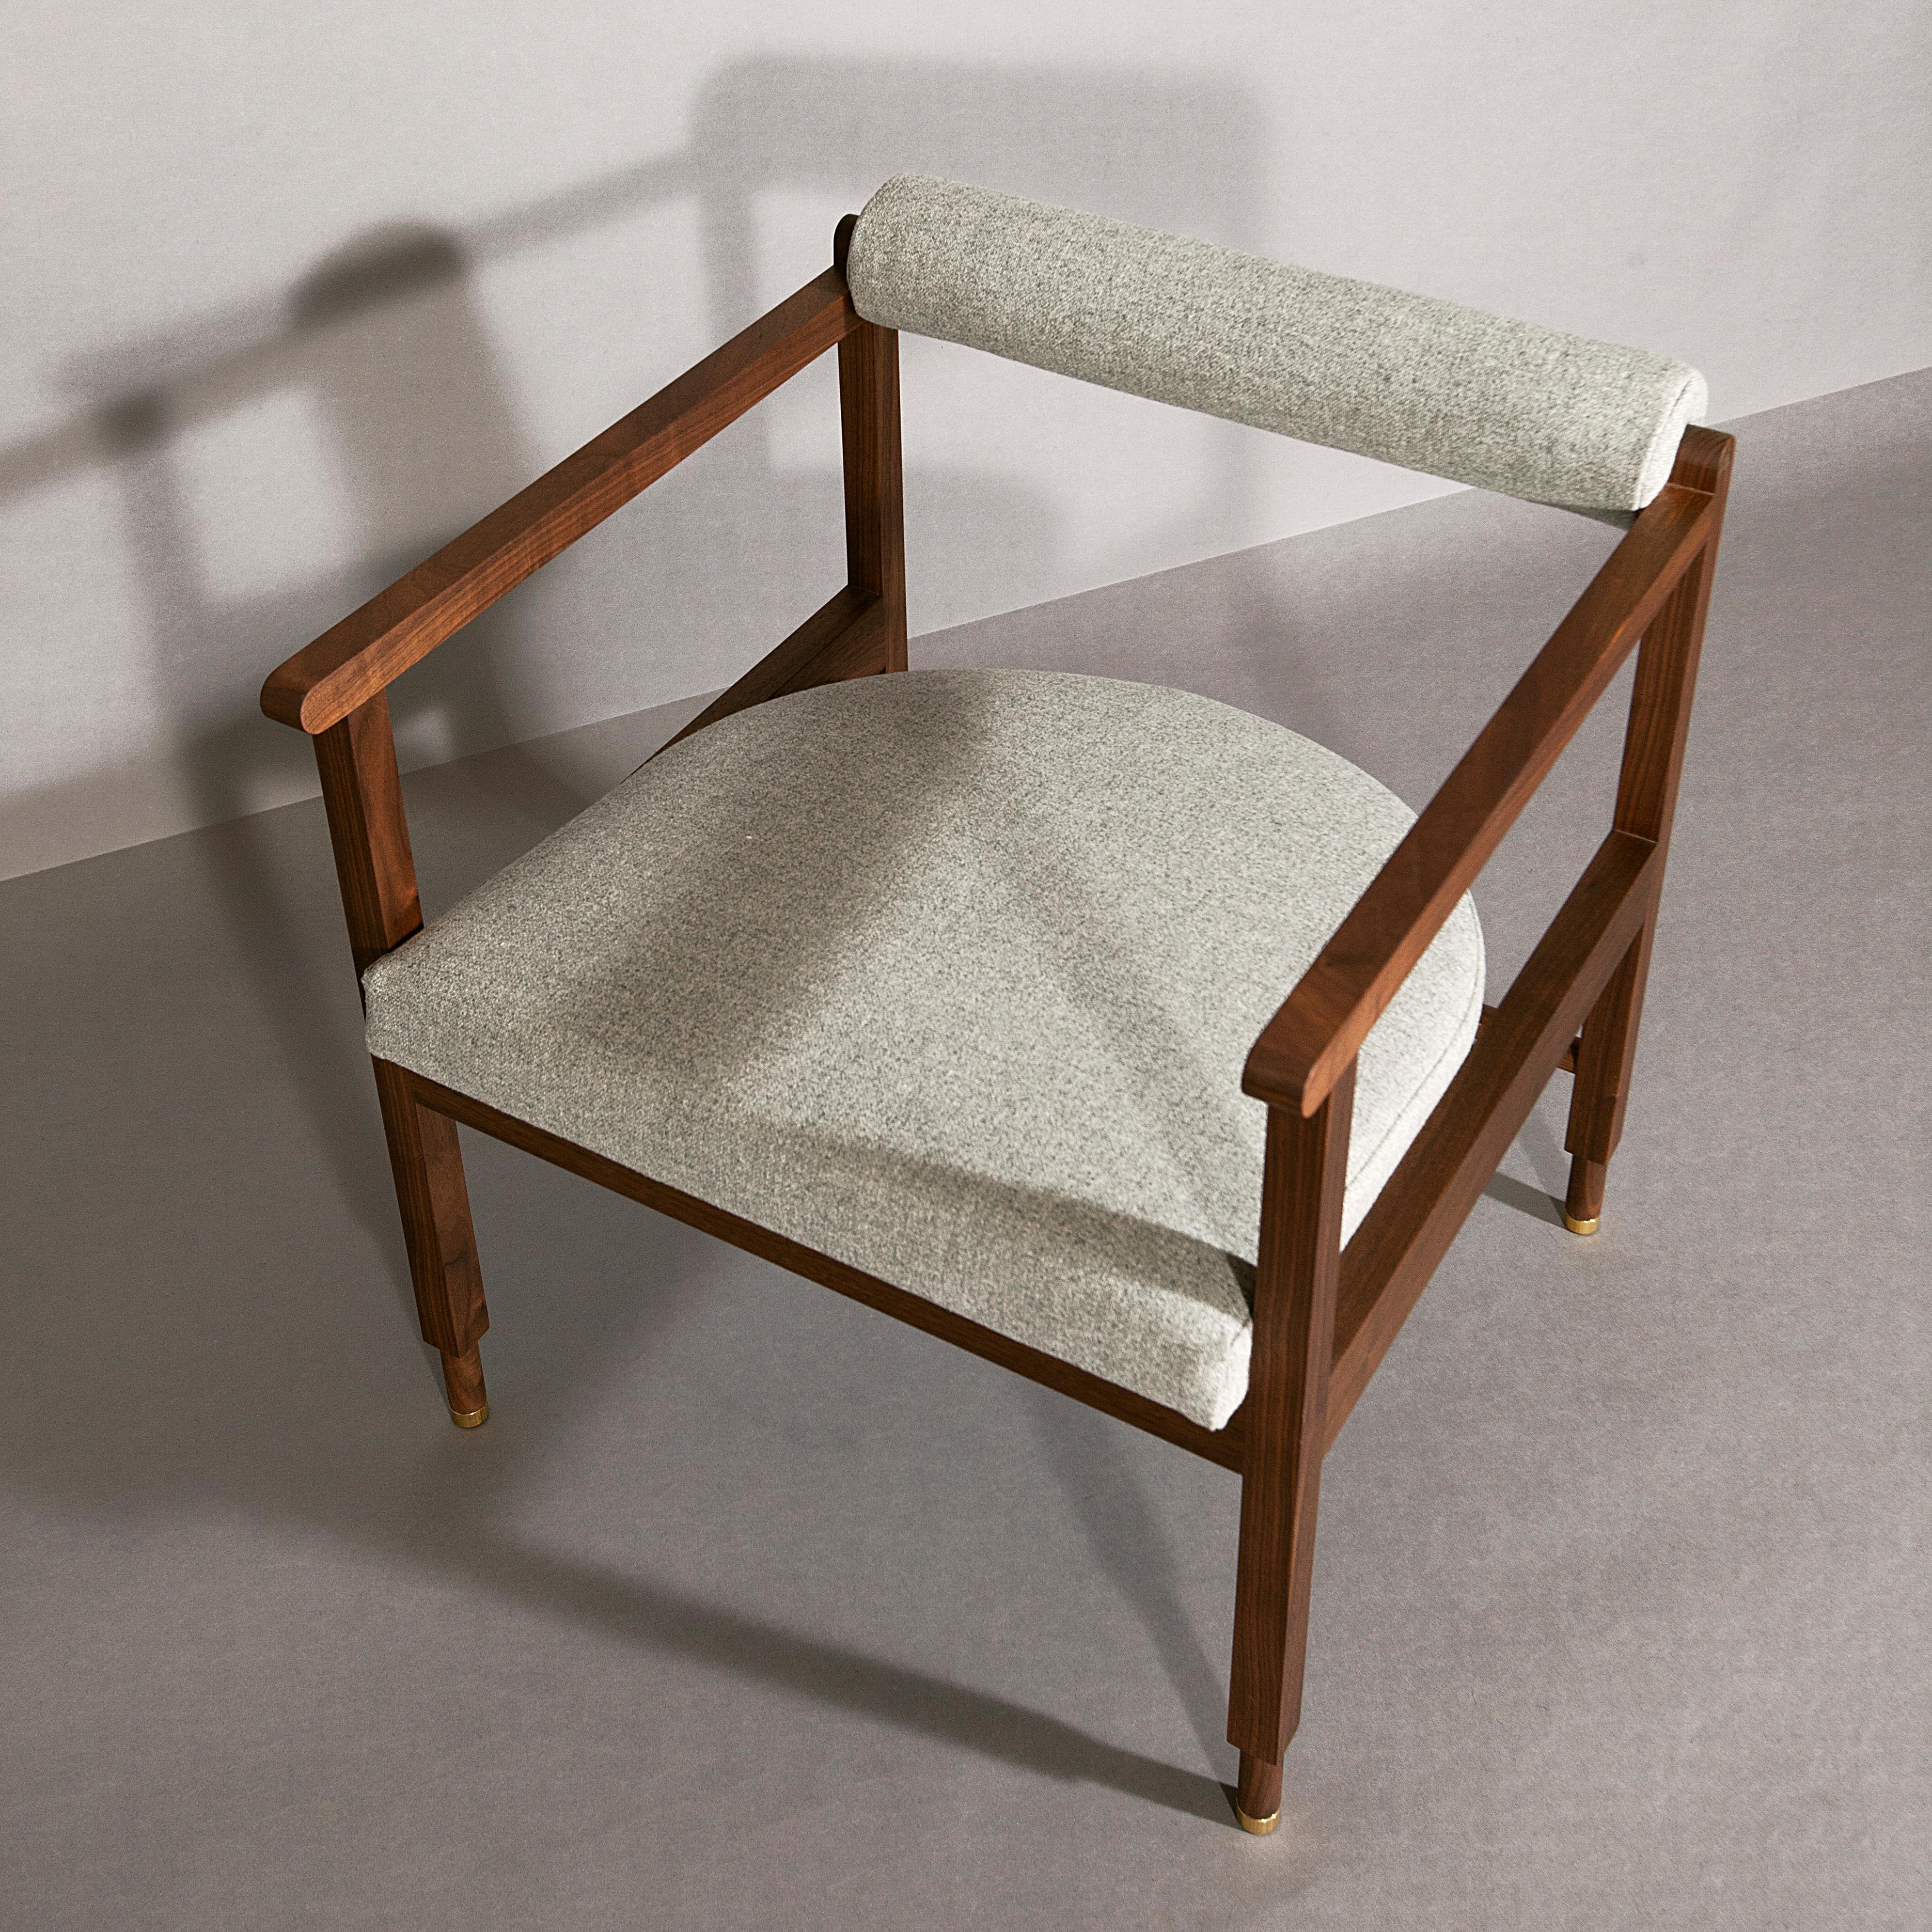 As shown: 
Solid walnut with grey wool upholstery.
Oil and wax finish.
Dimensions: 26 1/2